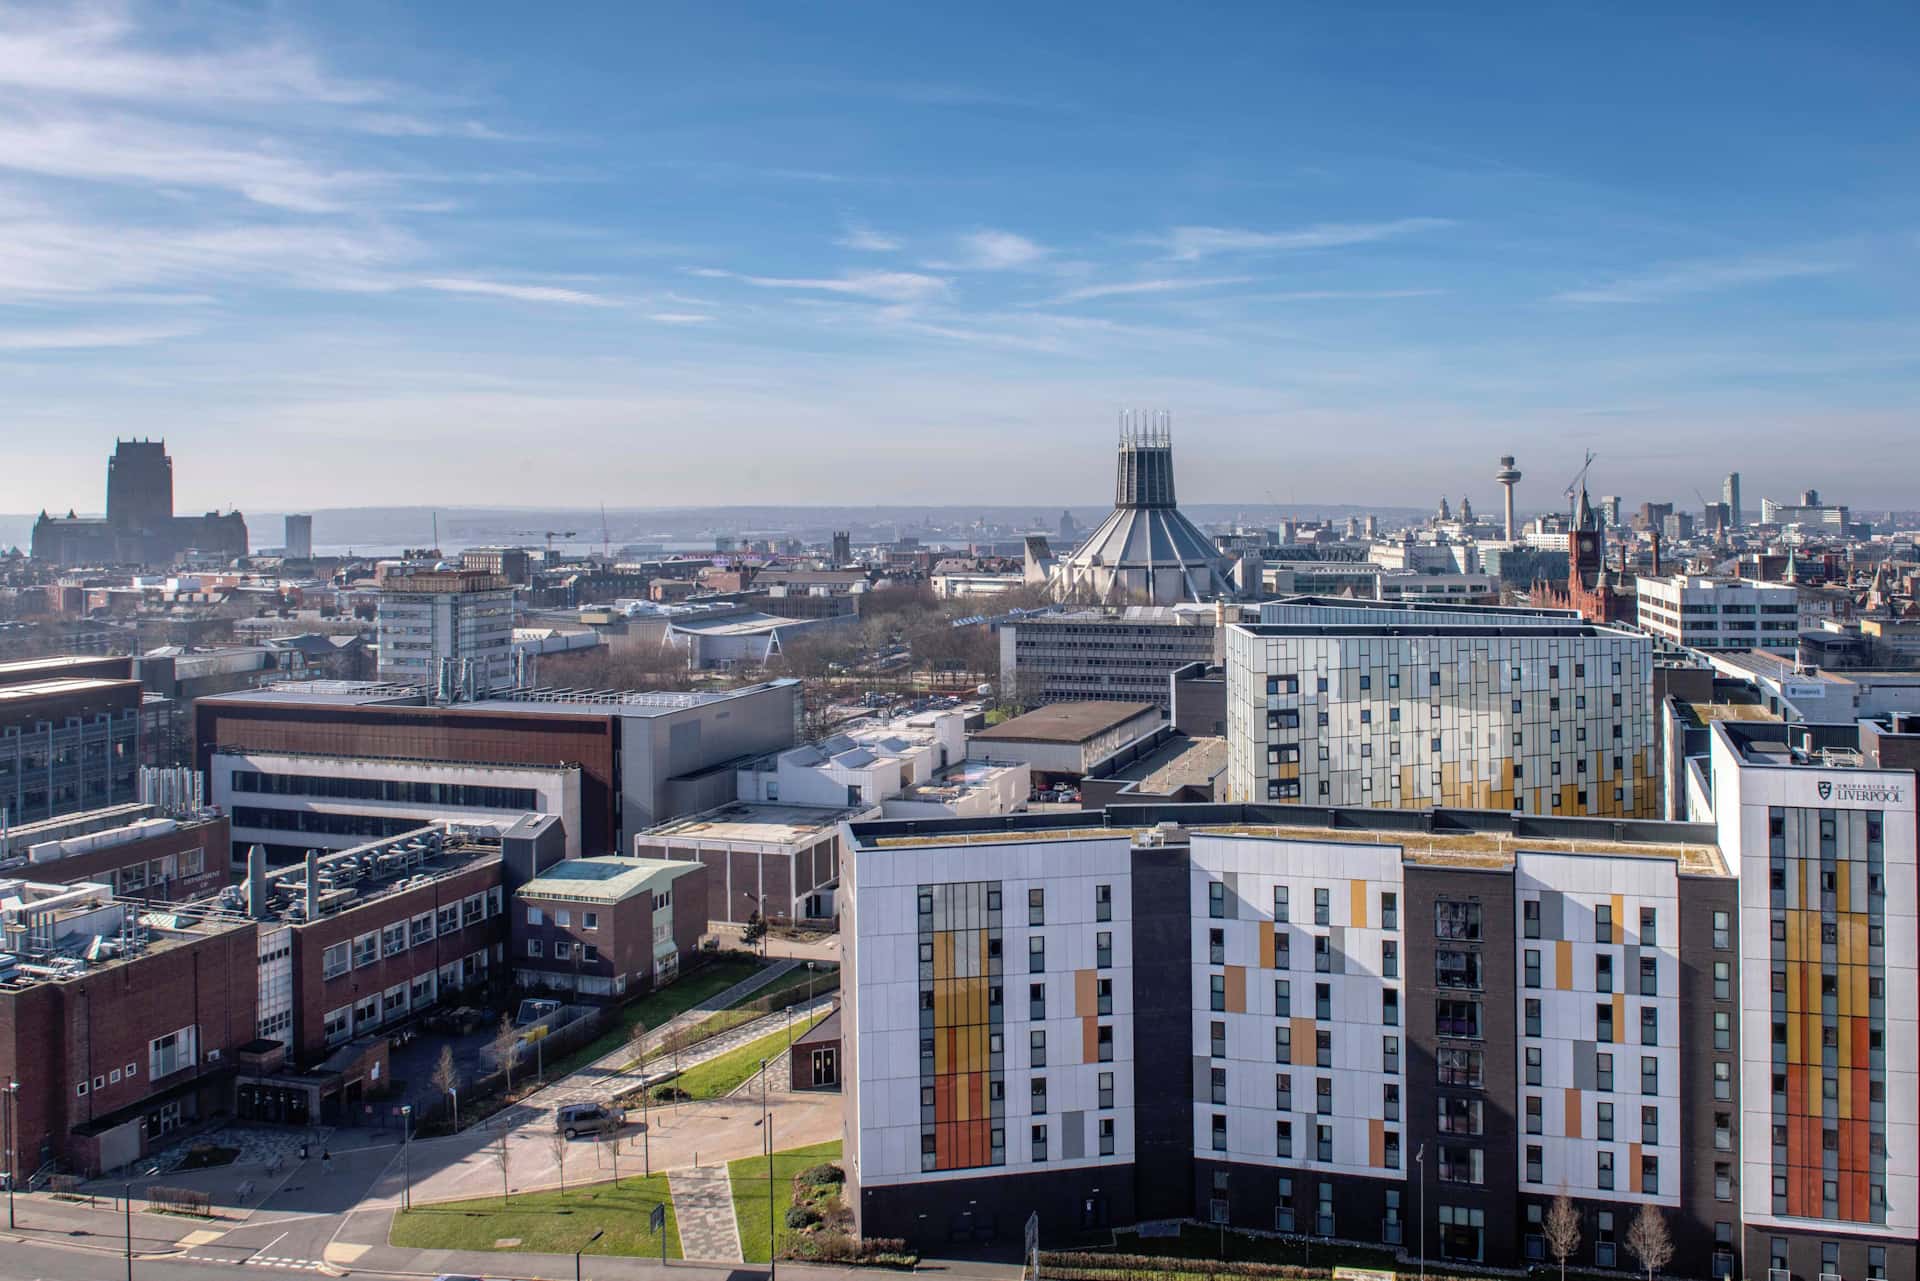 View across the city of Liverpool